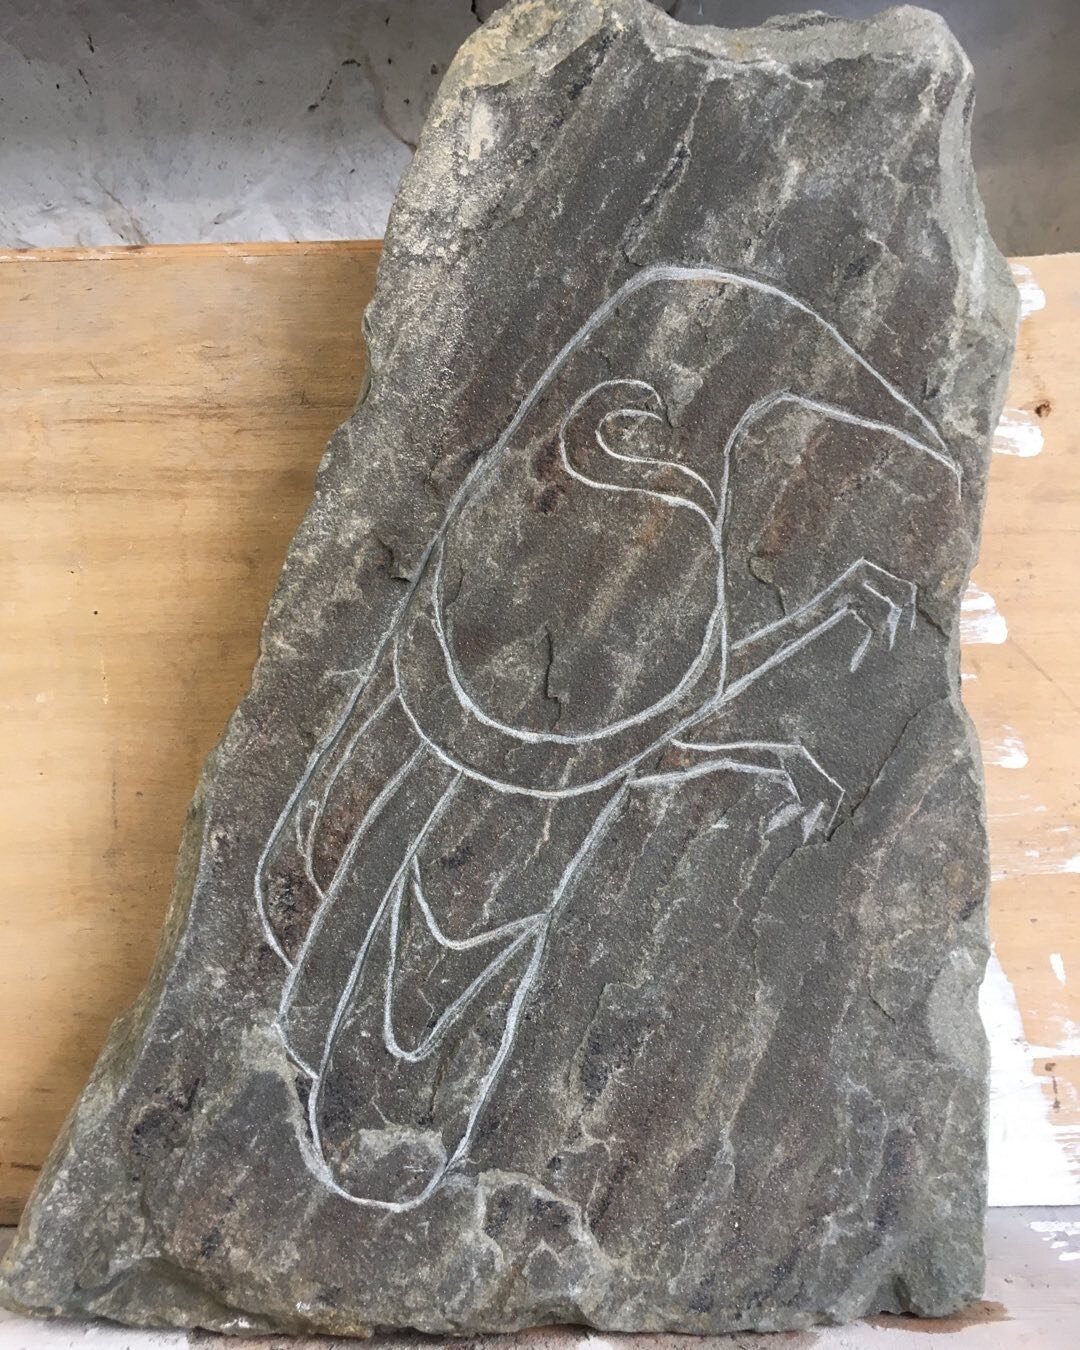 Great day Pictish carving with a great result  #courses #stonecarving #pict #craft